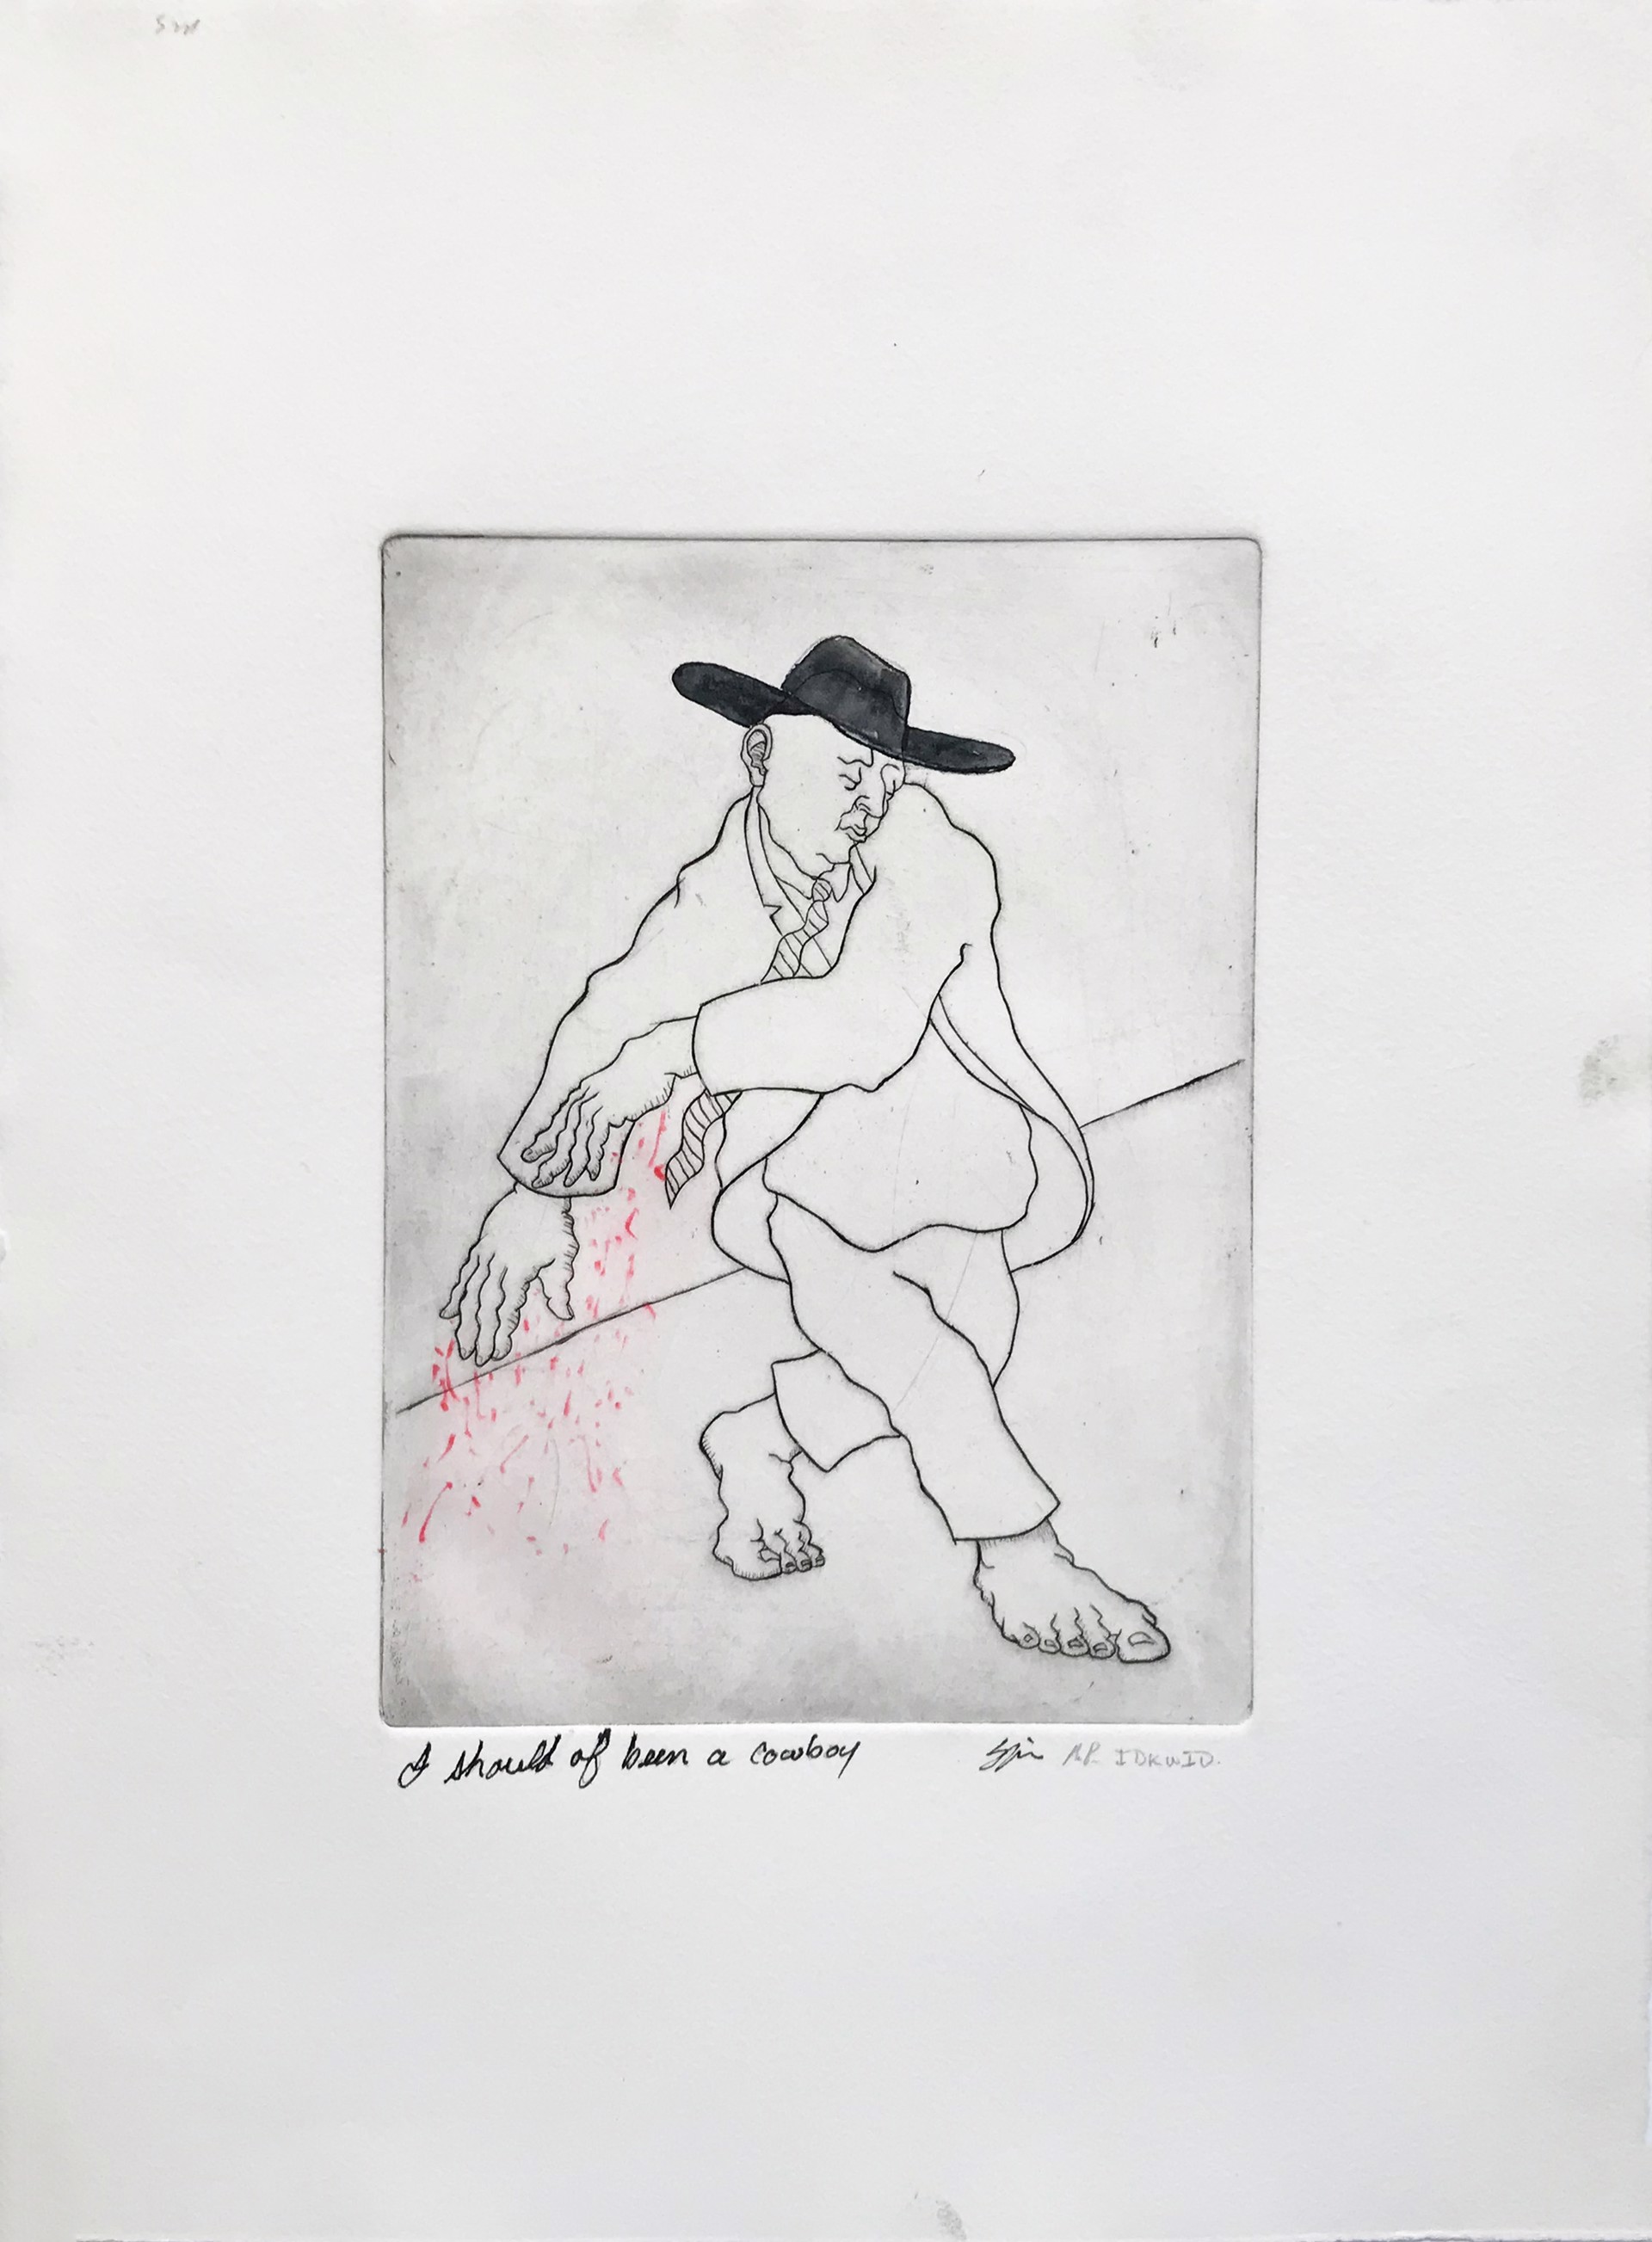 Untitled (I Should of Been a Cowboy) AP by Martin Spei